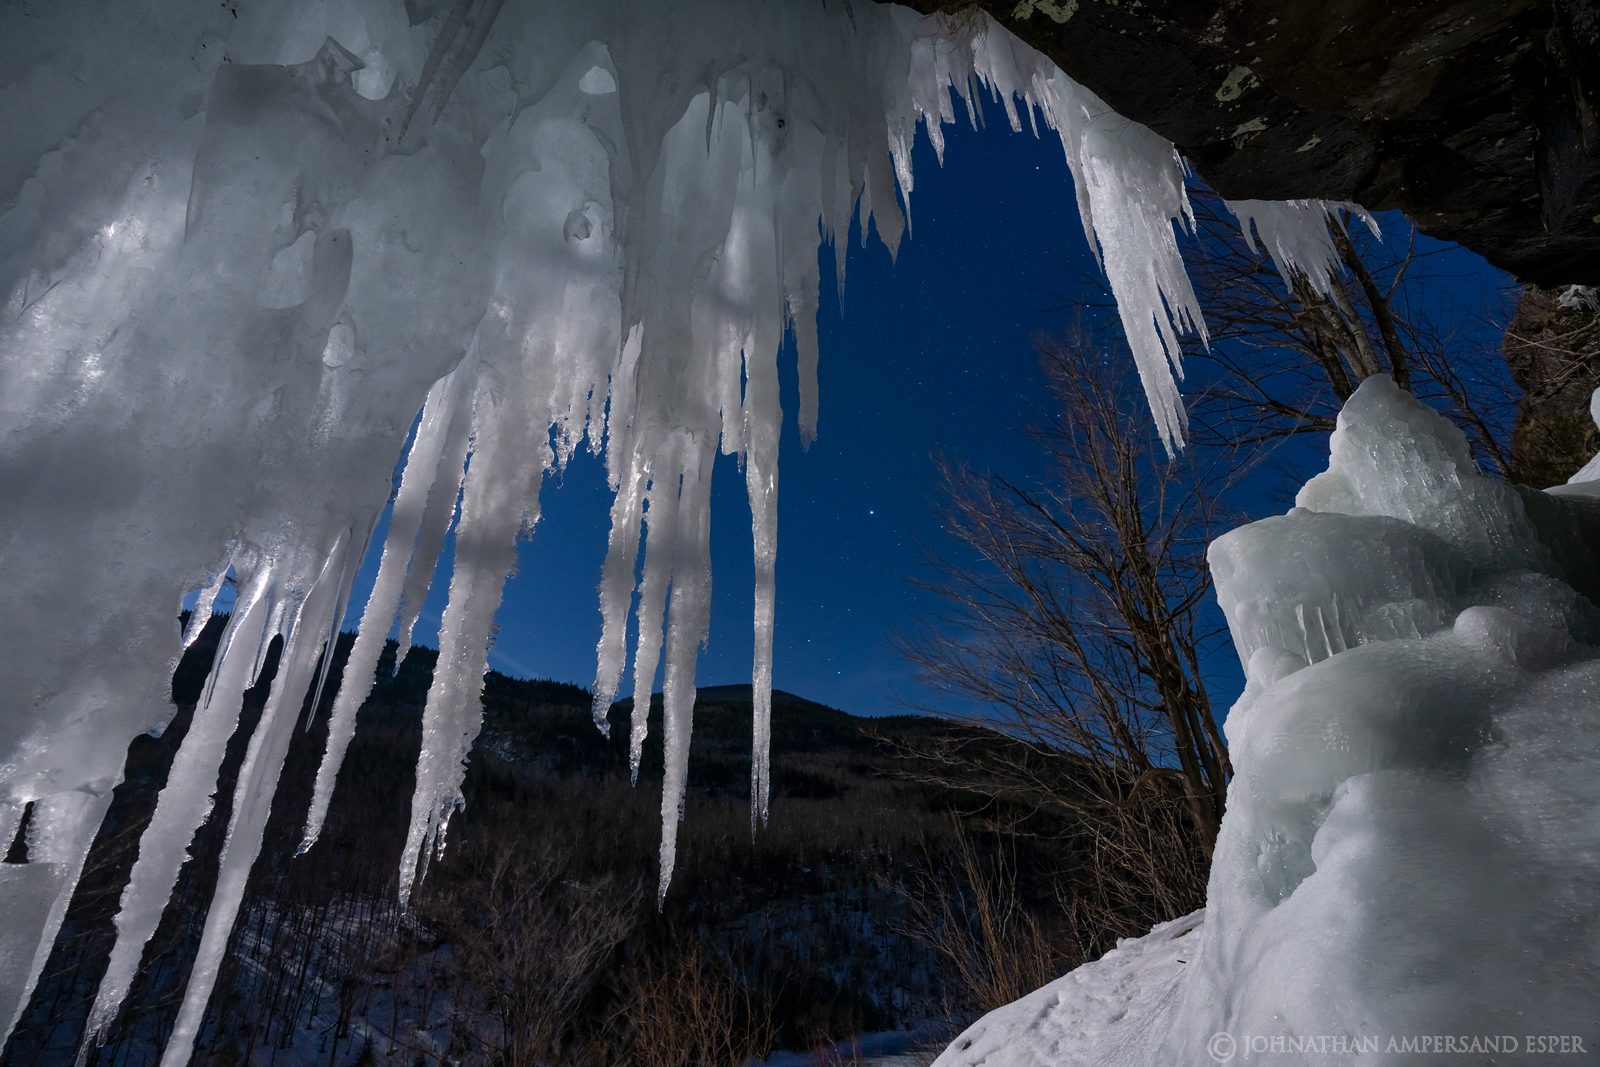 Pitchoff Mt,icicles,moon,night,moonlight,Pitchoff Mt cliffs,Cascade Pass,winter,March,2020